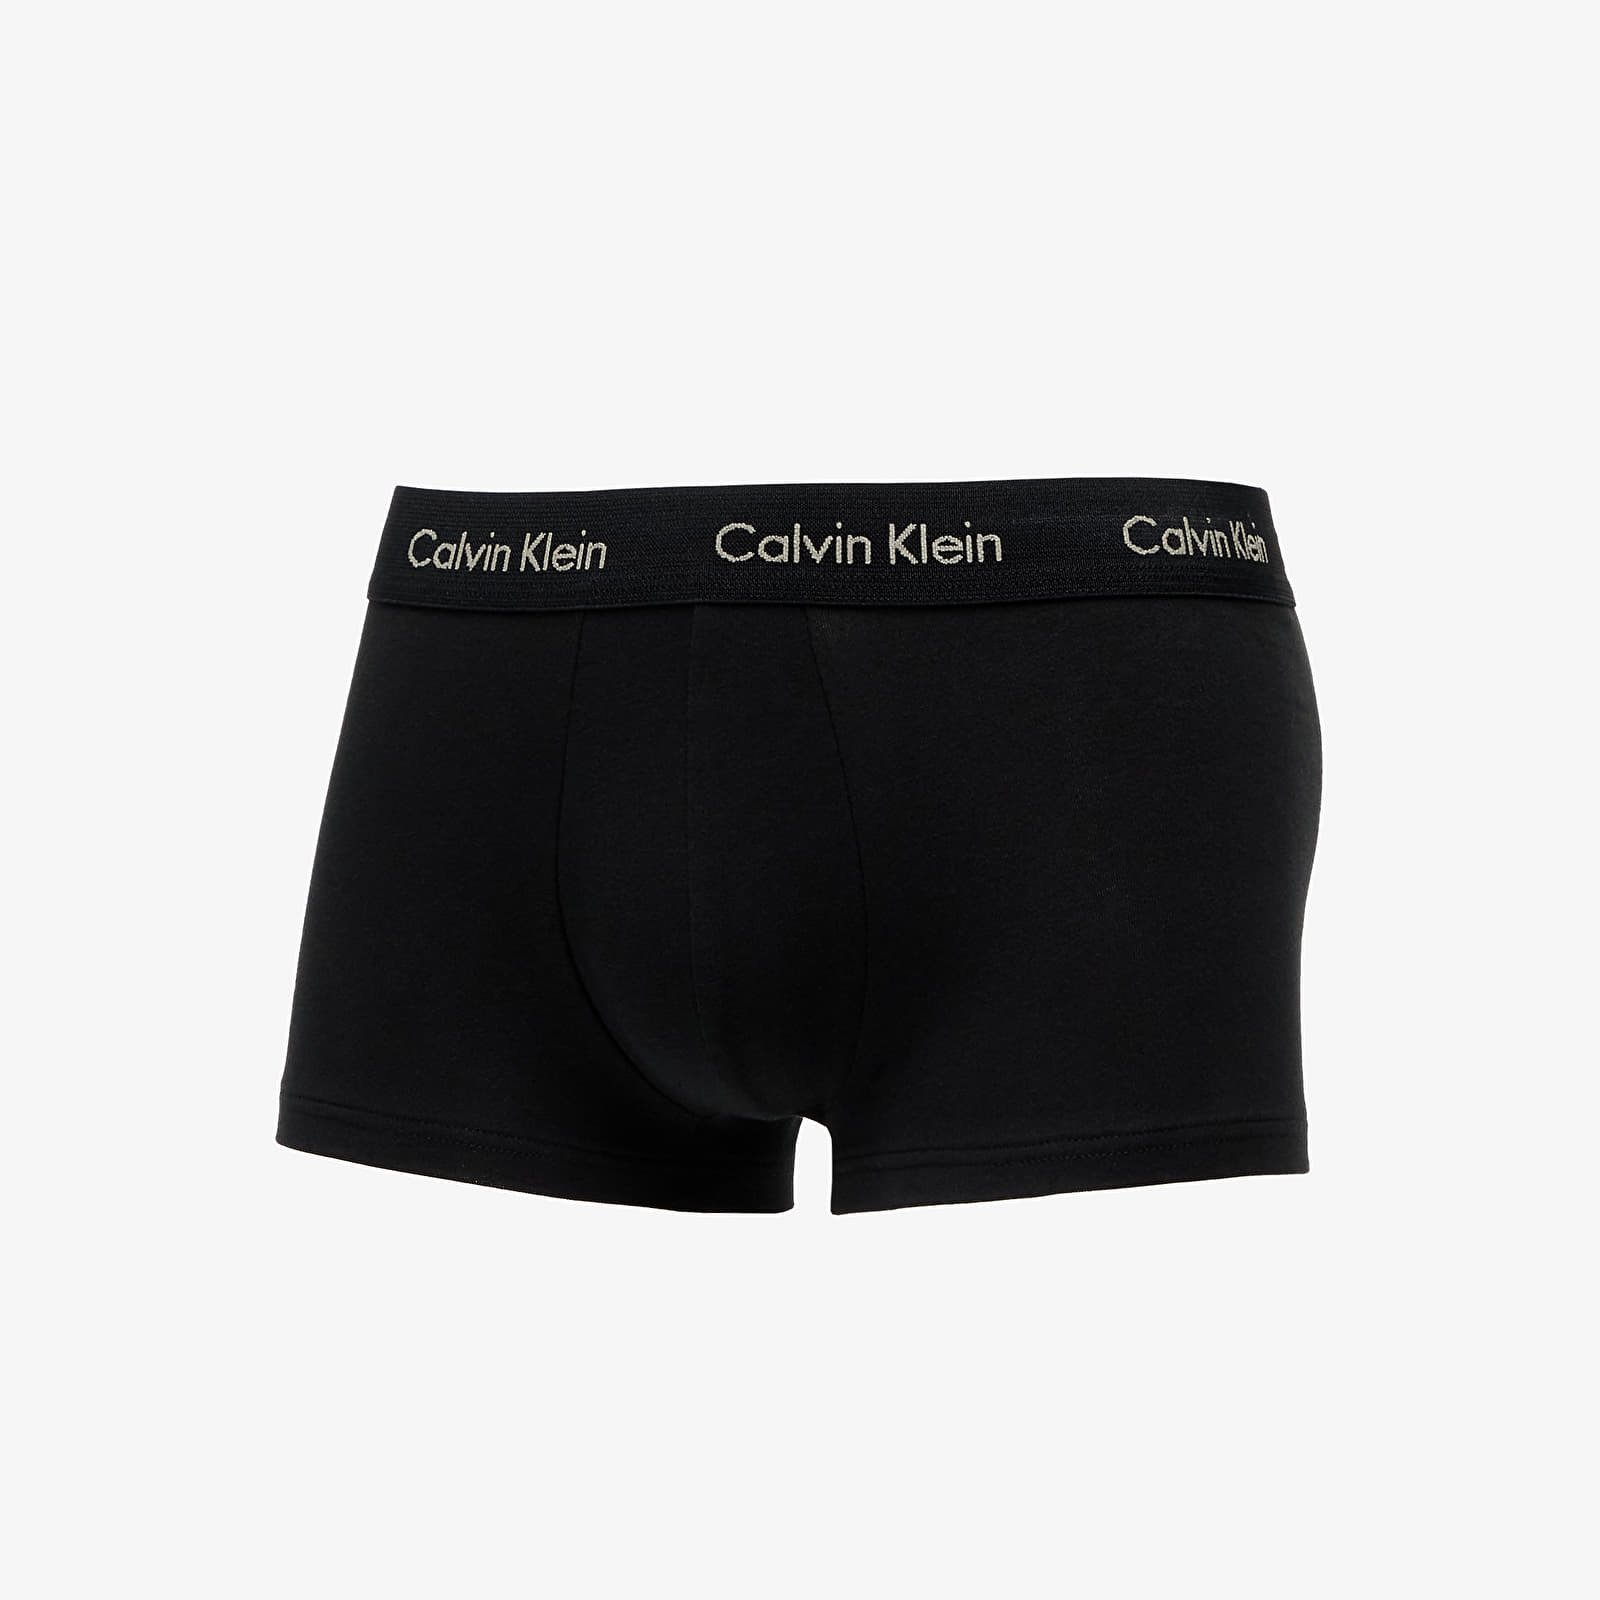 Cotton Stretch Low Rise Trunk 3-Pack